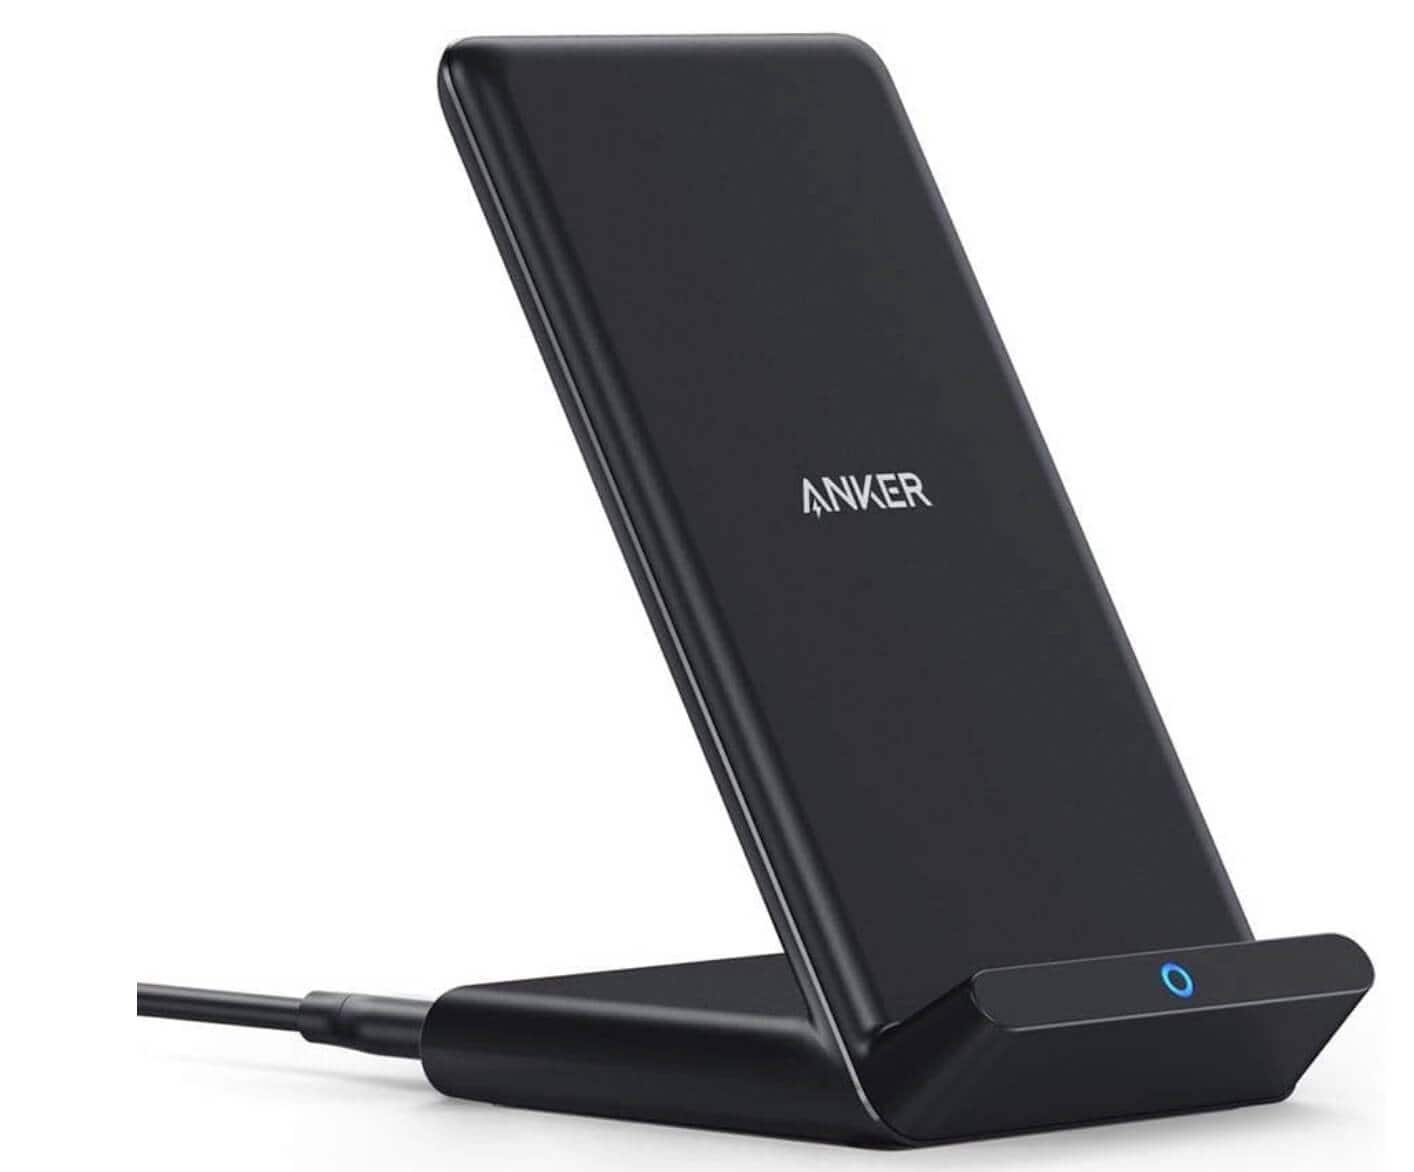 Anker wireless charging dock for Samsung Galaxy S7 Edge.